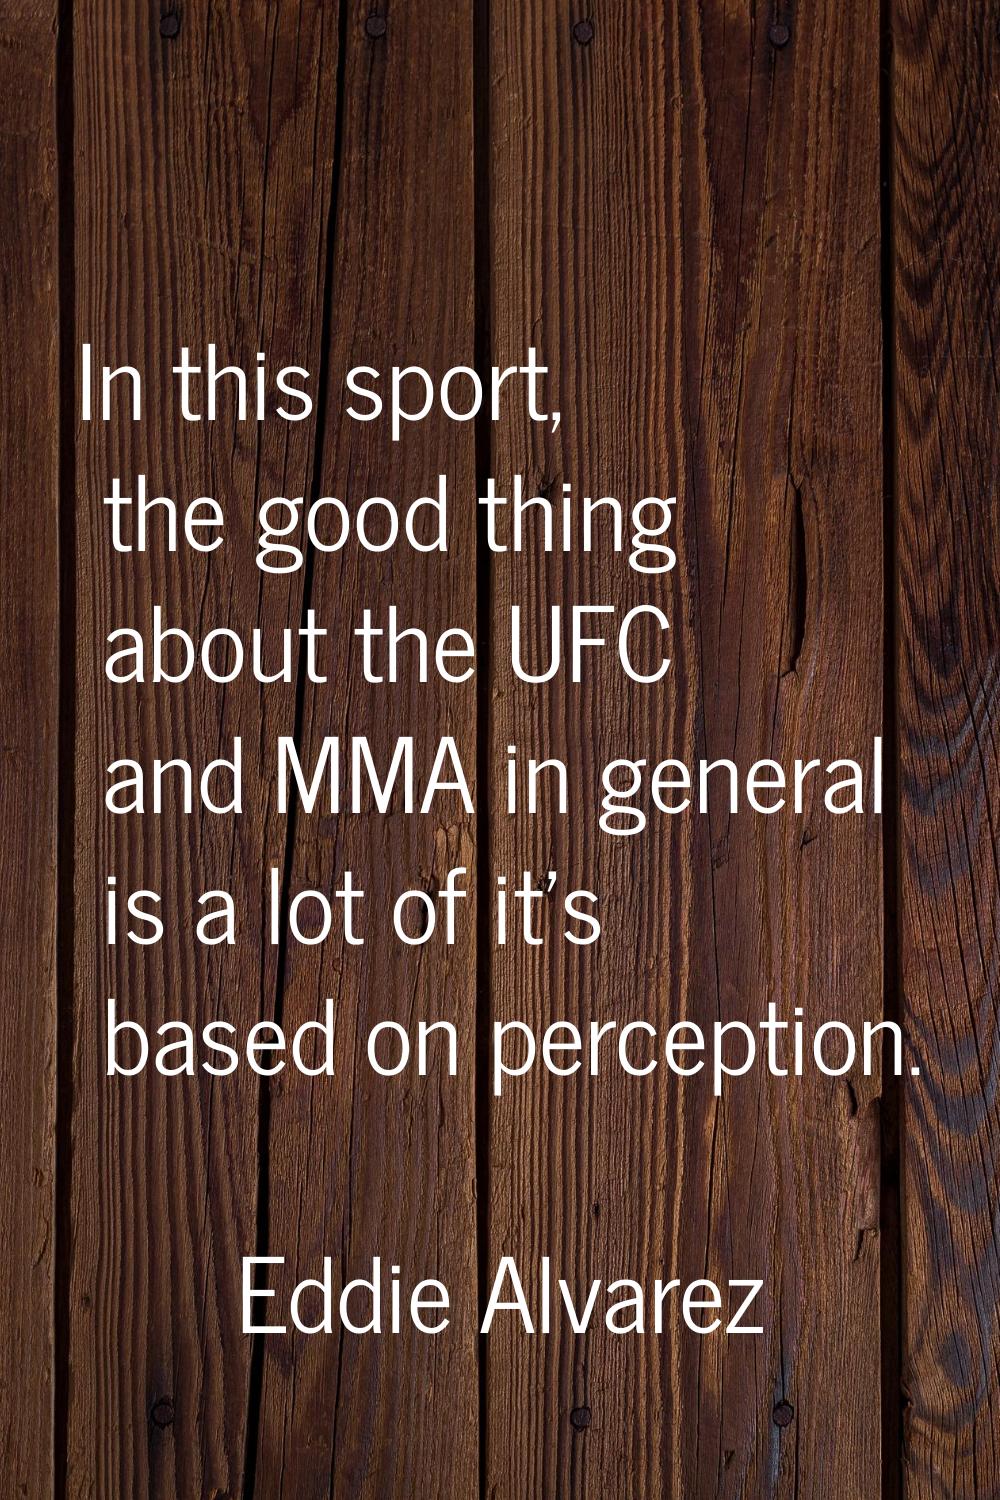 In this sport, the good thing about the UFC and MMA in general is a lot of it's based on perception